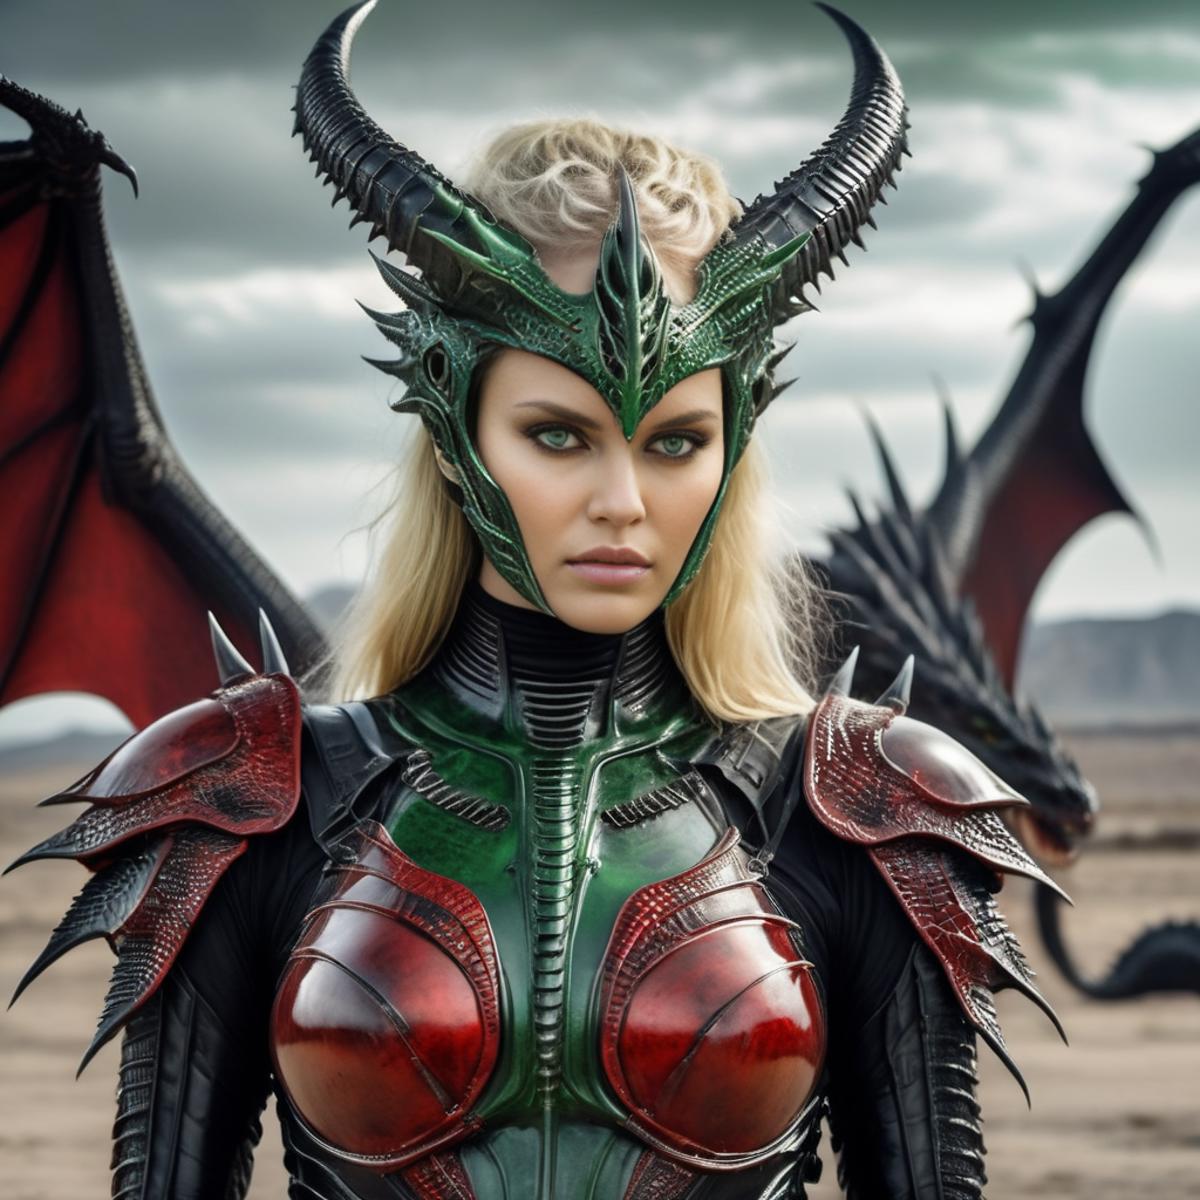 Woman wearing a green dragon costume with red accents.